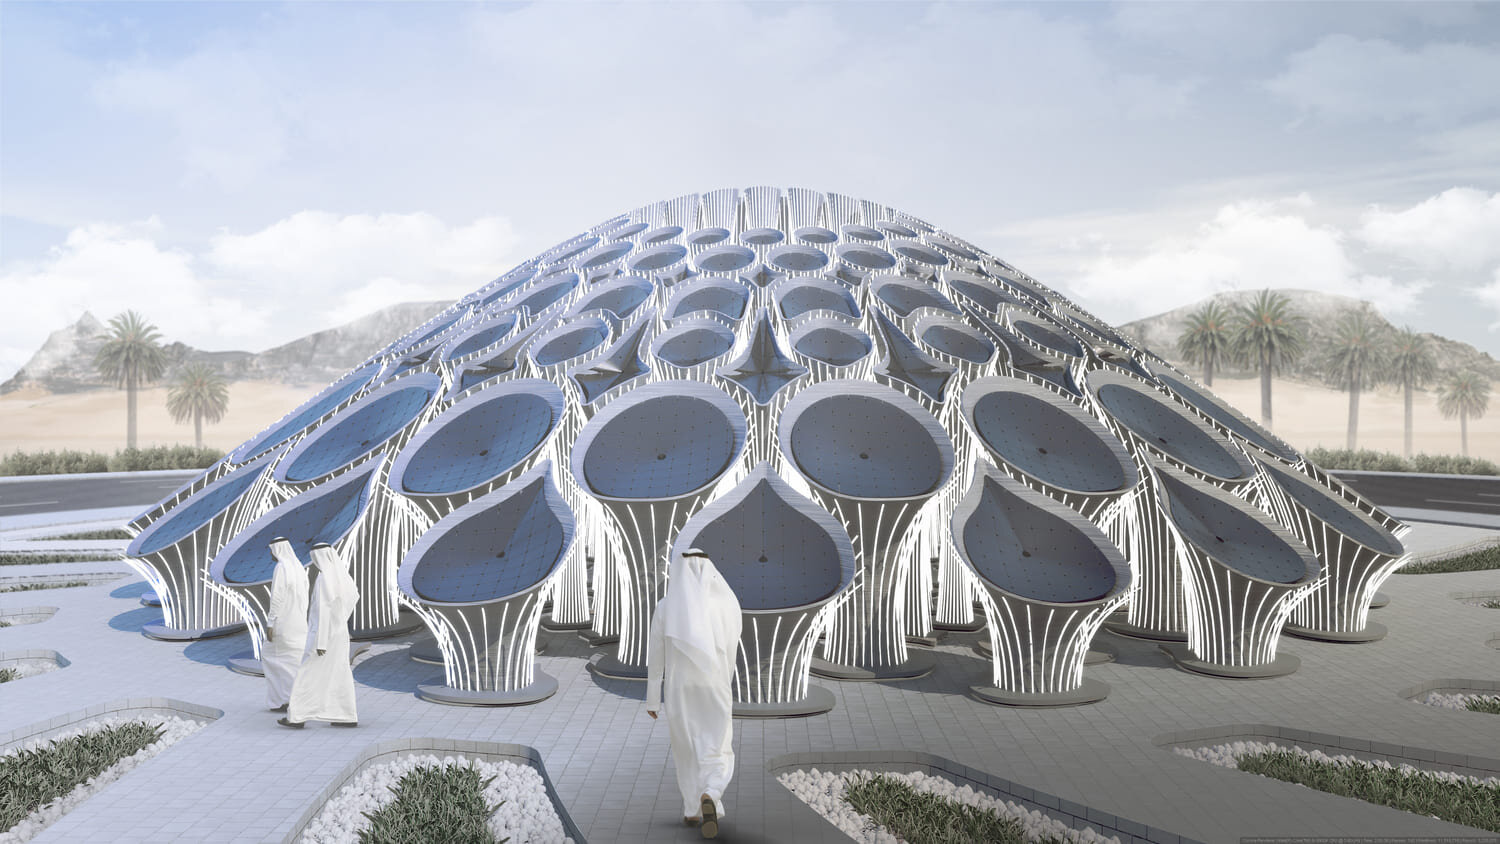  MEAN* Designs Spatial Forest Of 3D Printed Concrete For Expo 2020 Dubai